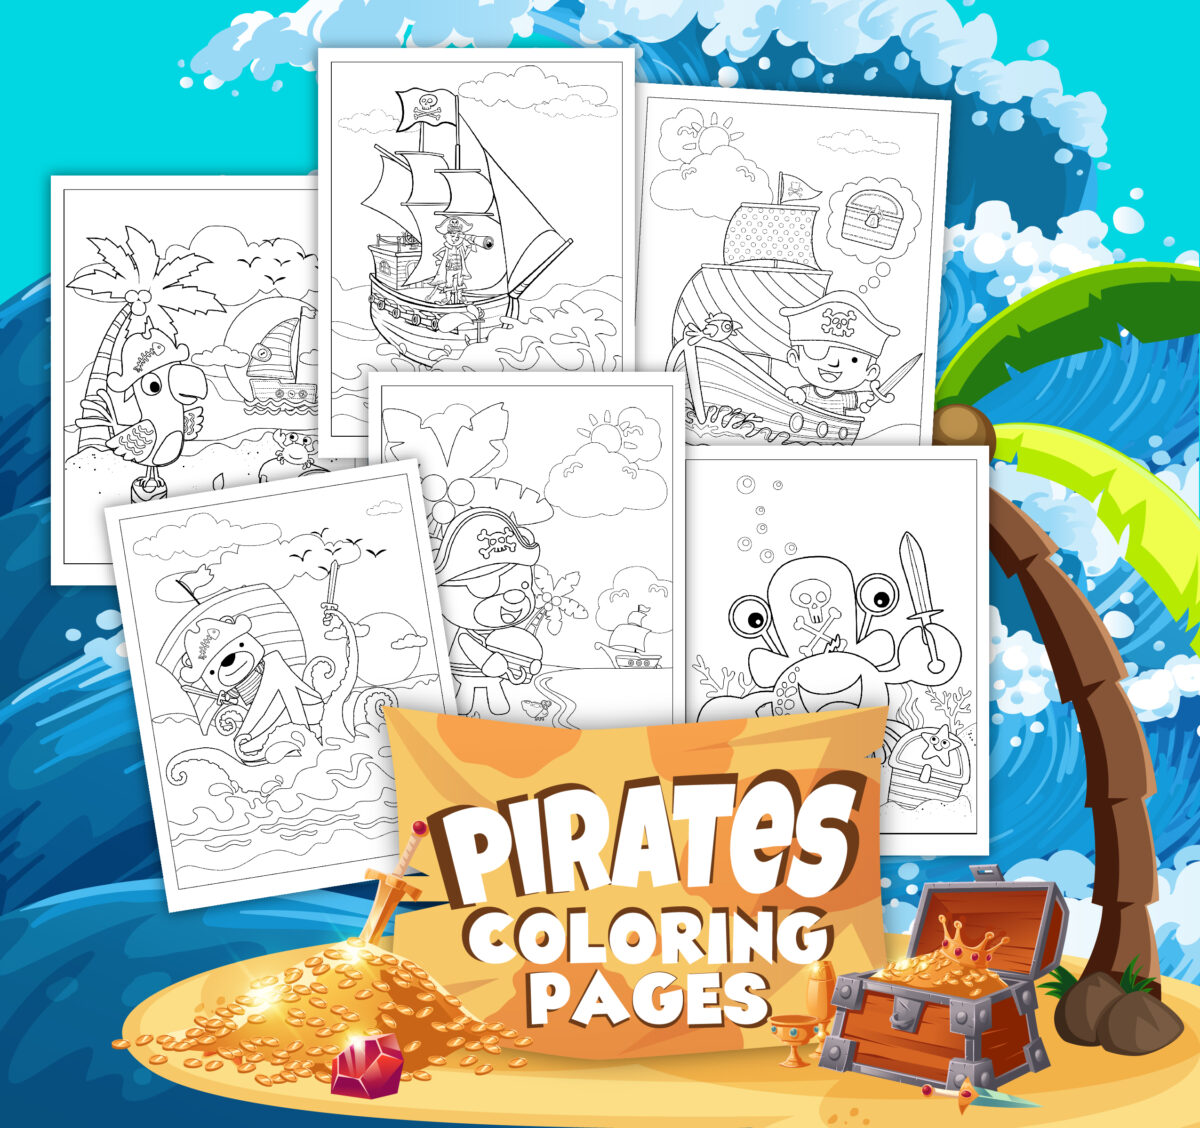 Ahoy, mateys! Download these 10 FREE printable Pirate colouring pages for kids. Guaranteed to keep the little buccaneers entertained!